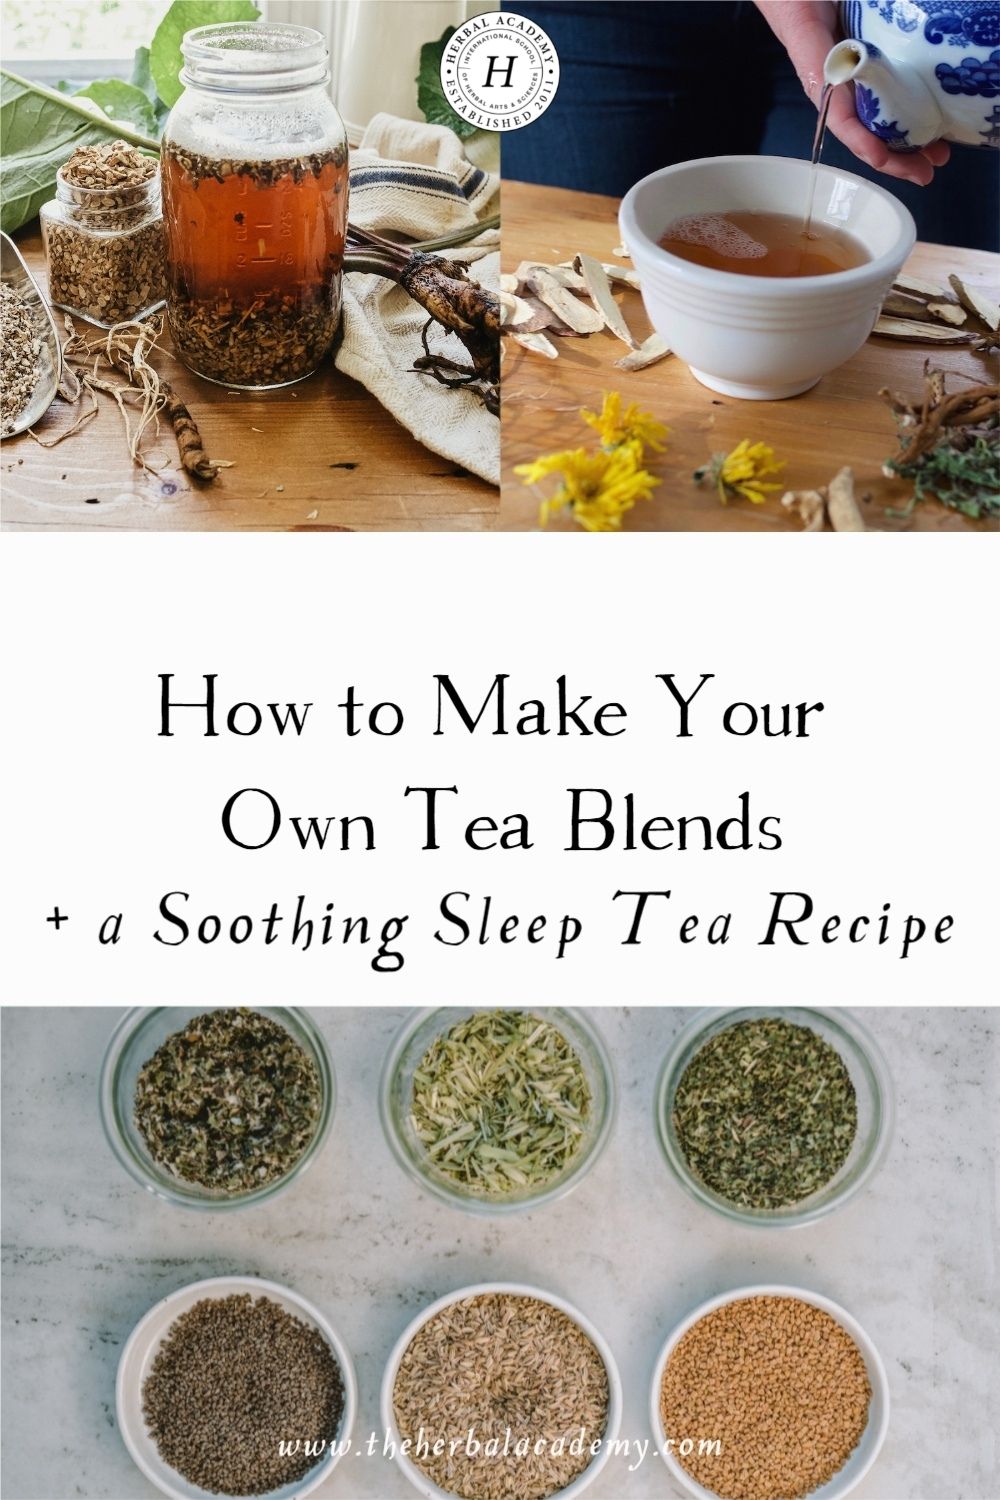 How to Make Your Own Tea Blends + a Soothing Sleep Tea Recipe | Herbal Academy | This article is a guide to the art of making your own herbal tea blends that taste amazing and also offer great health benefits.